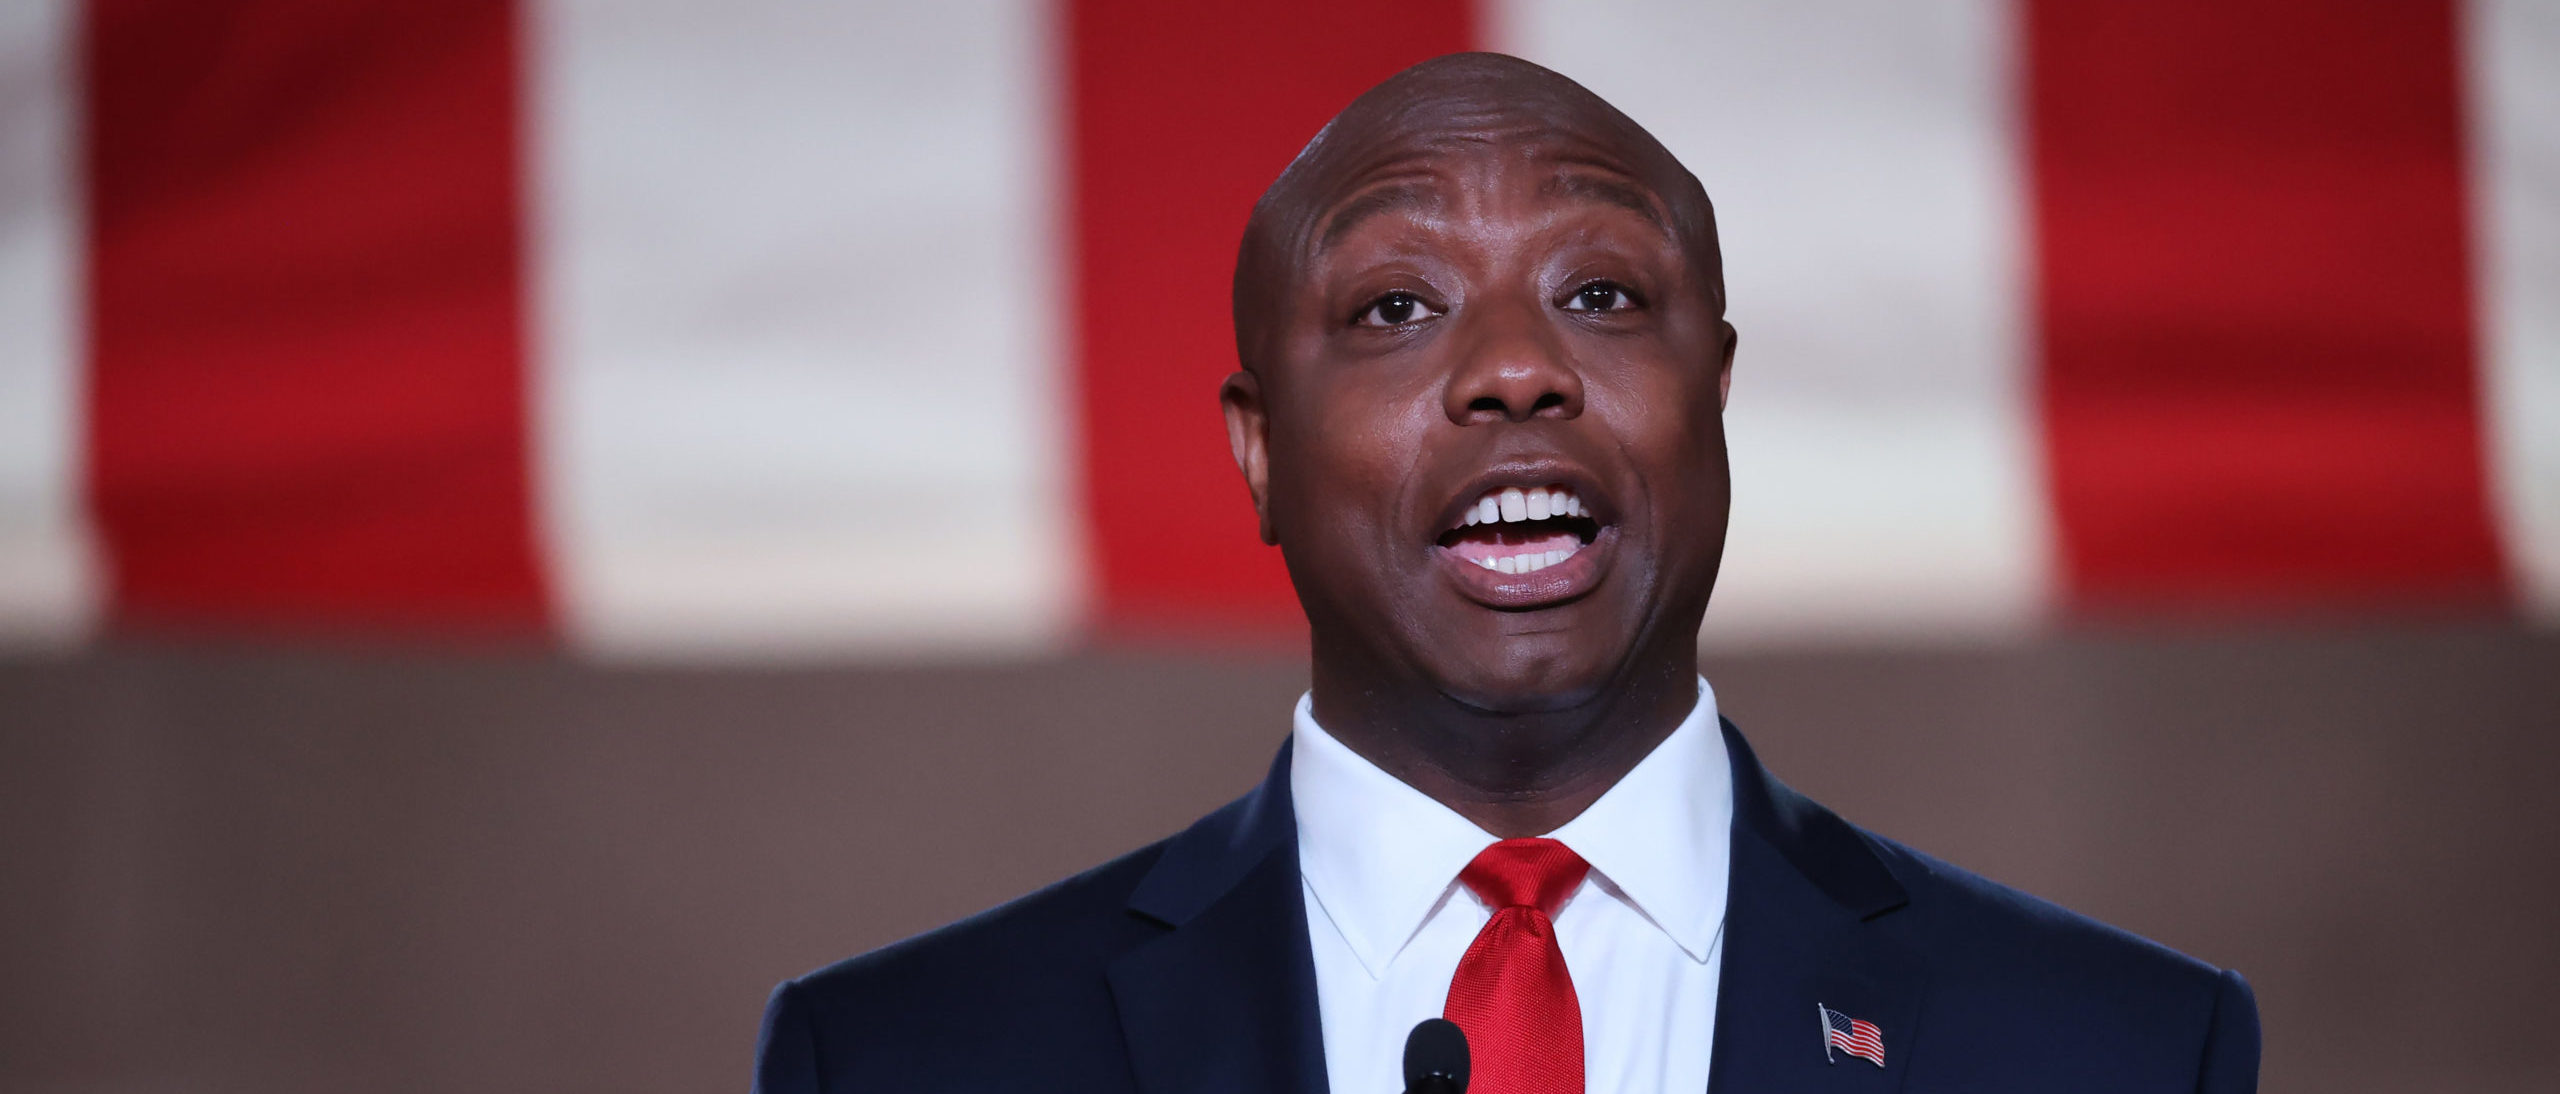 WASHINGTON, DC - AUGUST 24: U.S. Sen. Tim Scott (R-SC) stands on stage in an empty Mellon Auditorium while addressing the Republican National Convention at the Mellon Auditorium on August 24, 2020 in Washington, DC. The novel coronavirus pandemic has forced the Republican Party to move away from an in-person convention to a televised format, similar to the Democratic Party's convention a week earlier. (Photo by Chip Somodevilla/Getty Images)